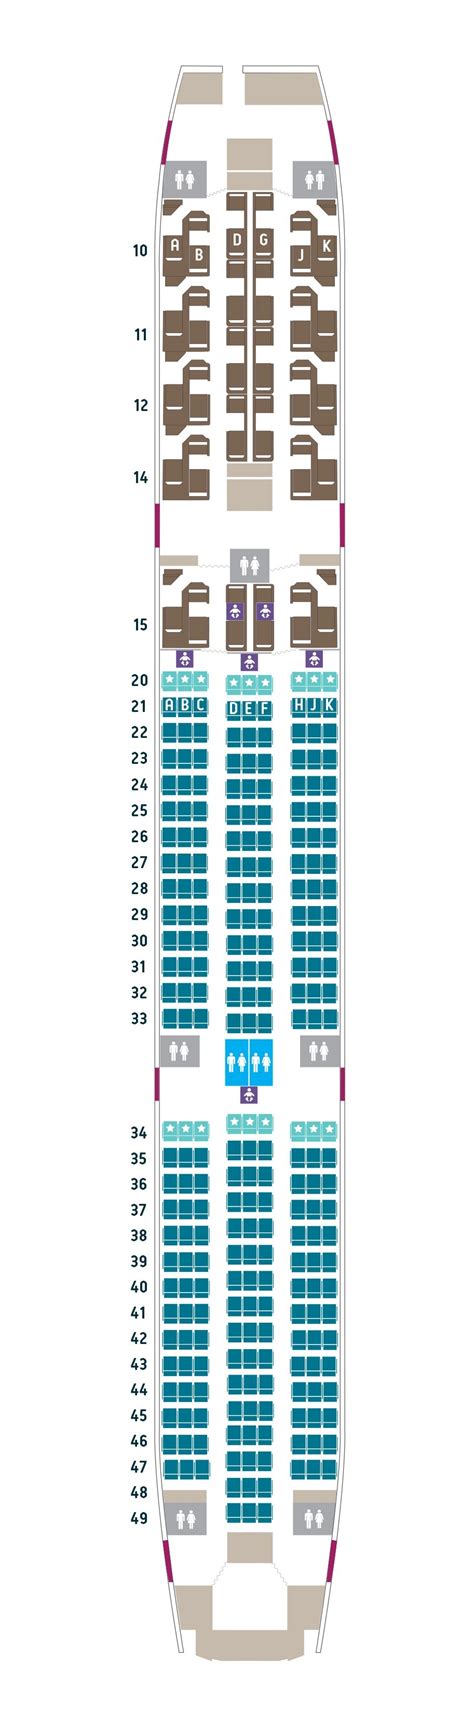 Dreamliner Seating Plan Two Birds Home